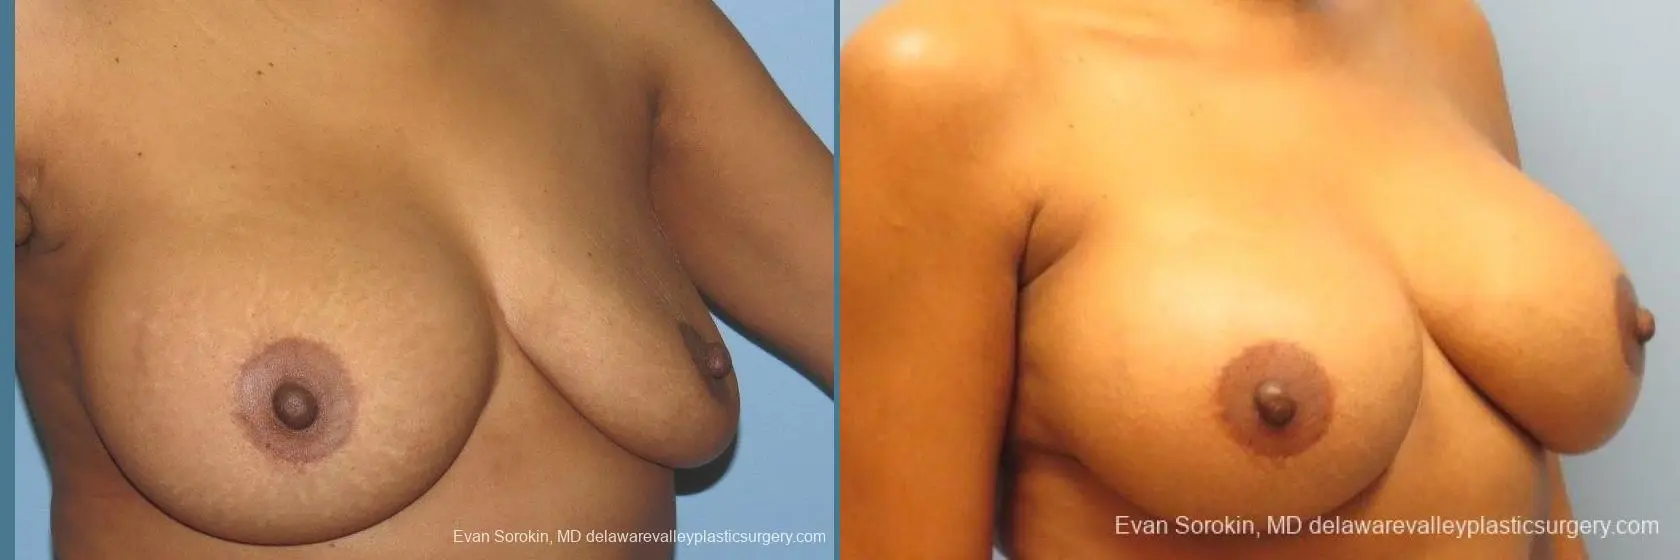 Philadelphia Breast Augmentation 10112 - Before and After 4